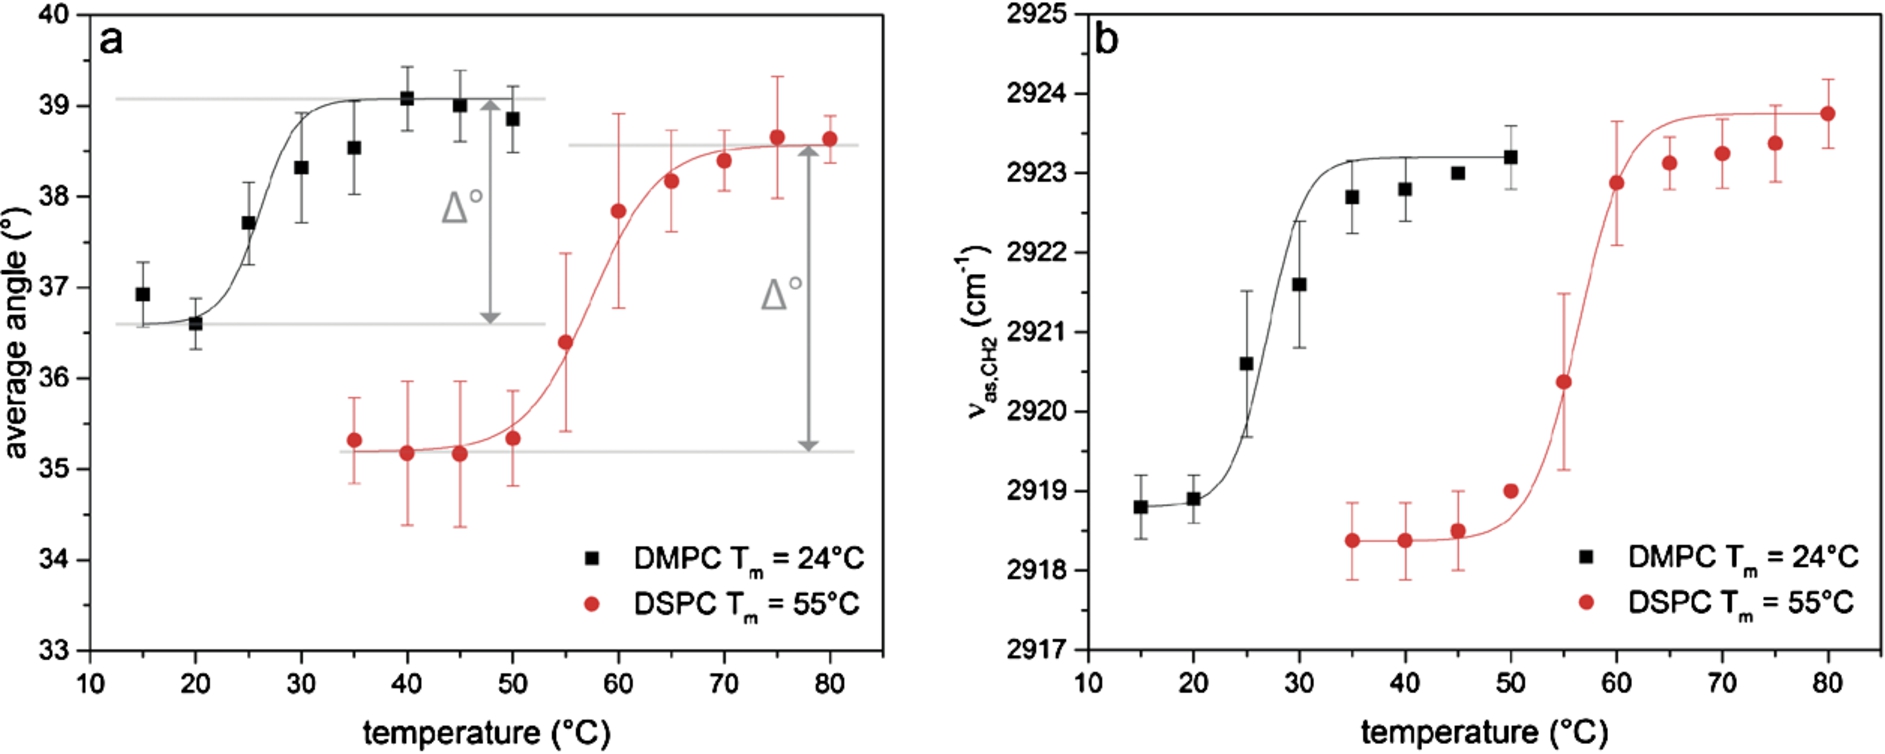 Changes upon lipid phase transition of DMPC and DSPC. Investigation of (a) the orientation of the lipid alkyl chain and (b) the frequency position of the band corresponding to the asymmetric stretching vibration of the CH2-groups (νas,CH2) in the lipid alkyl chain for DMPC (black squares) and DSPC (red circles) respectively. The data were fitted to determine the phase transition temperature and the difference in the average angle for both phases (Δ°).